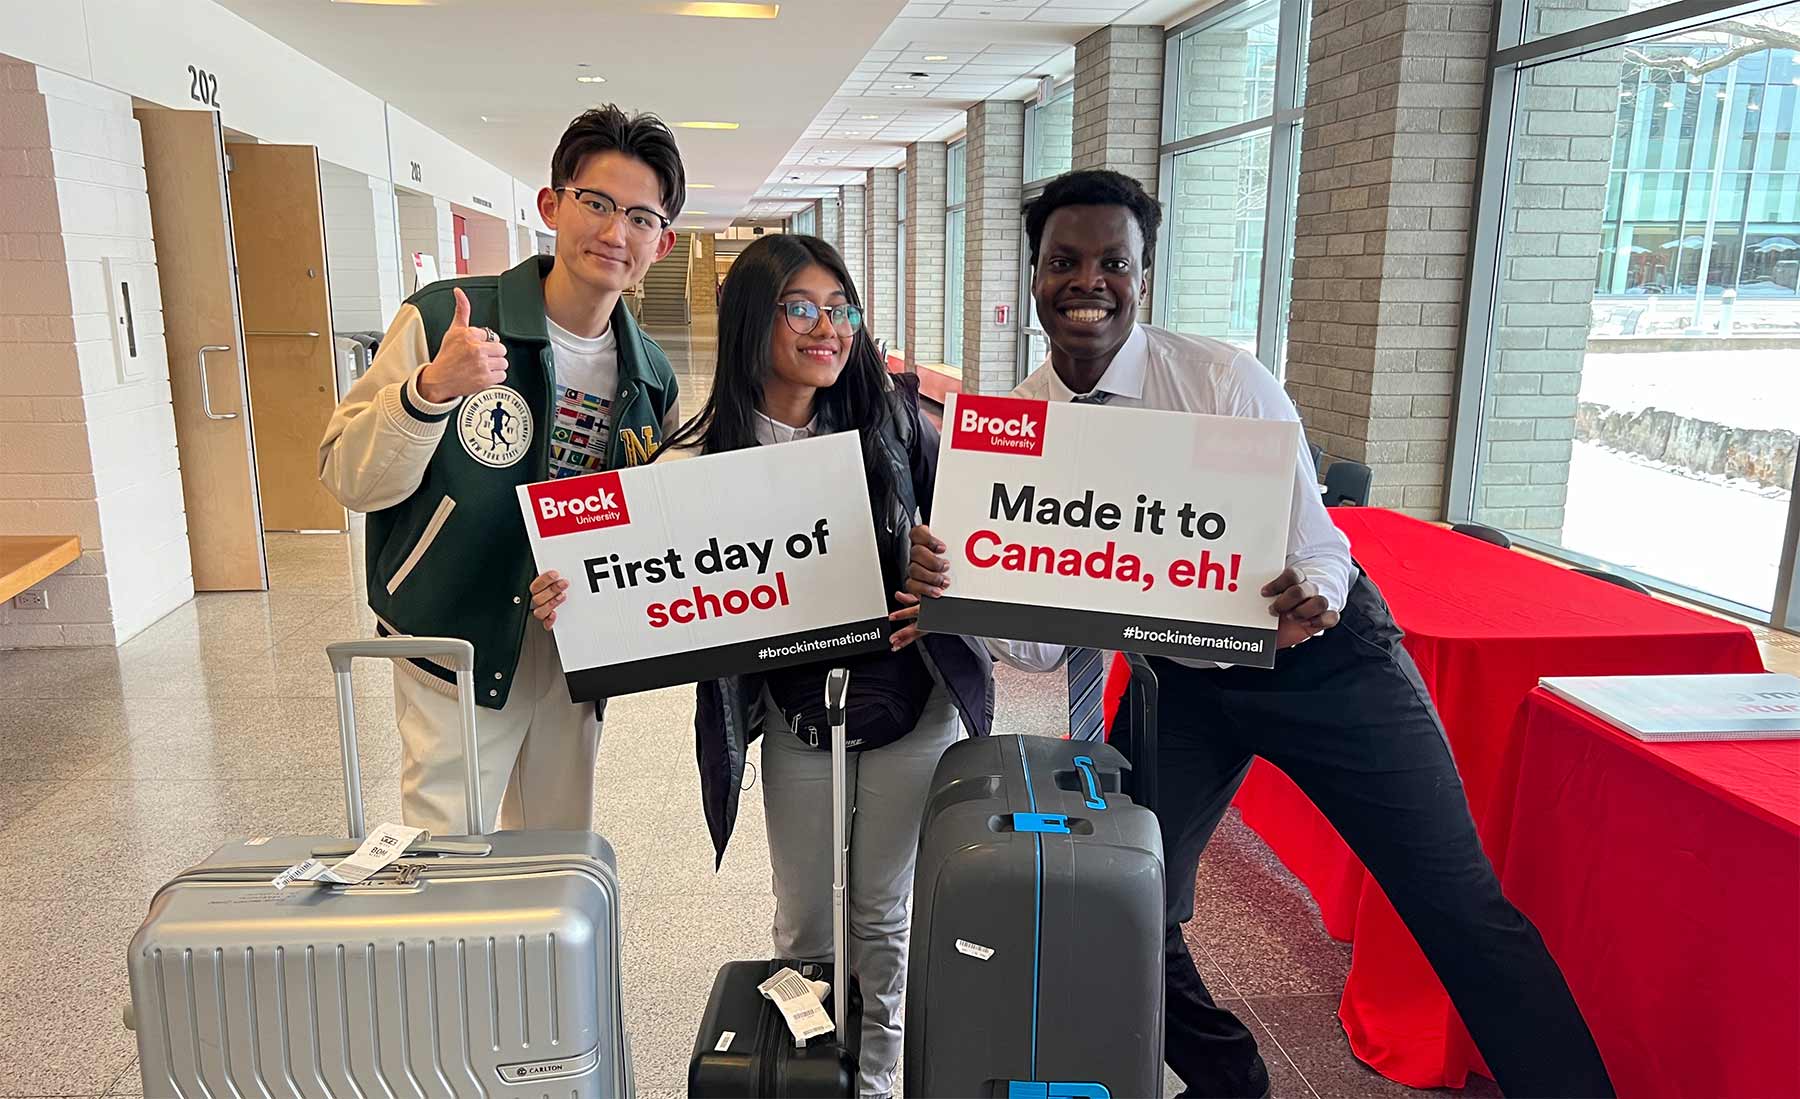 Three university students pose with suitcase and signs celebrating their first day of school in Canada. 